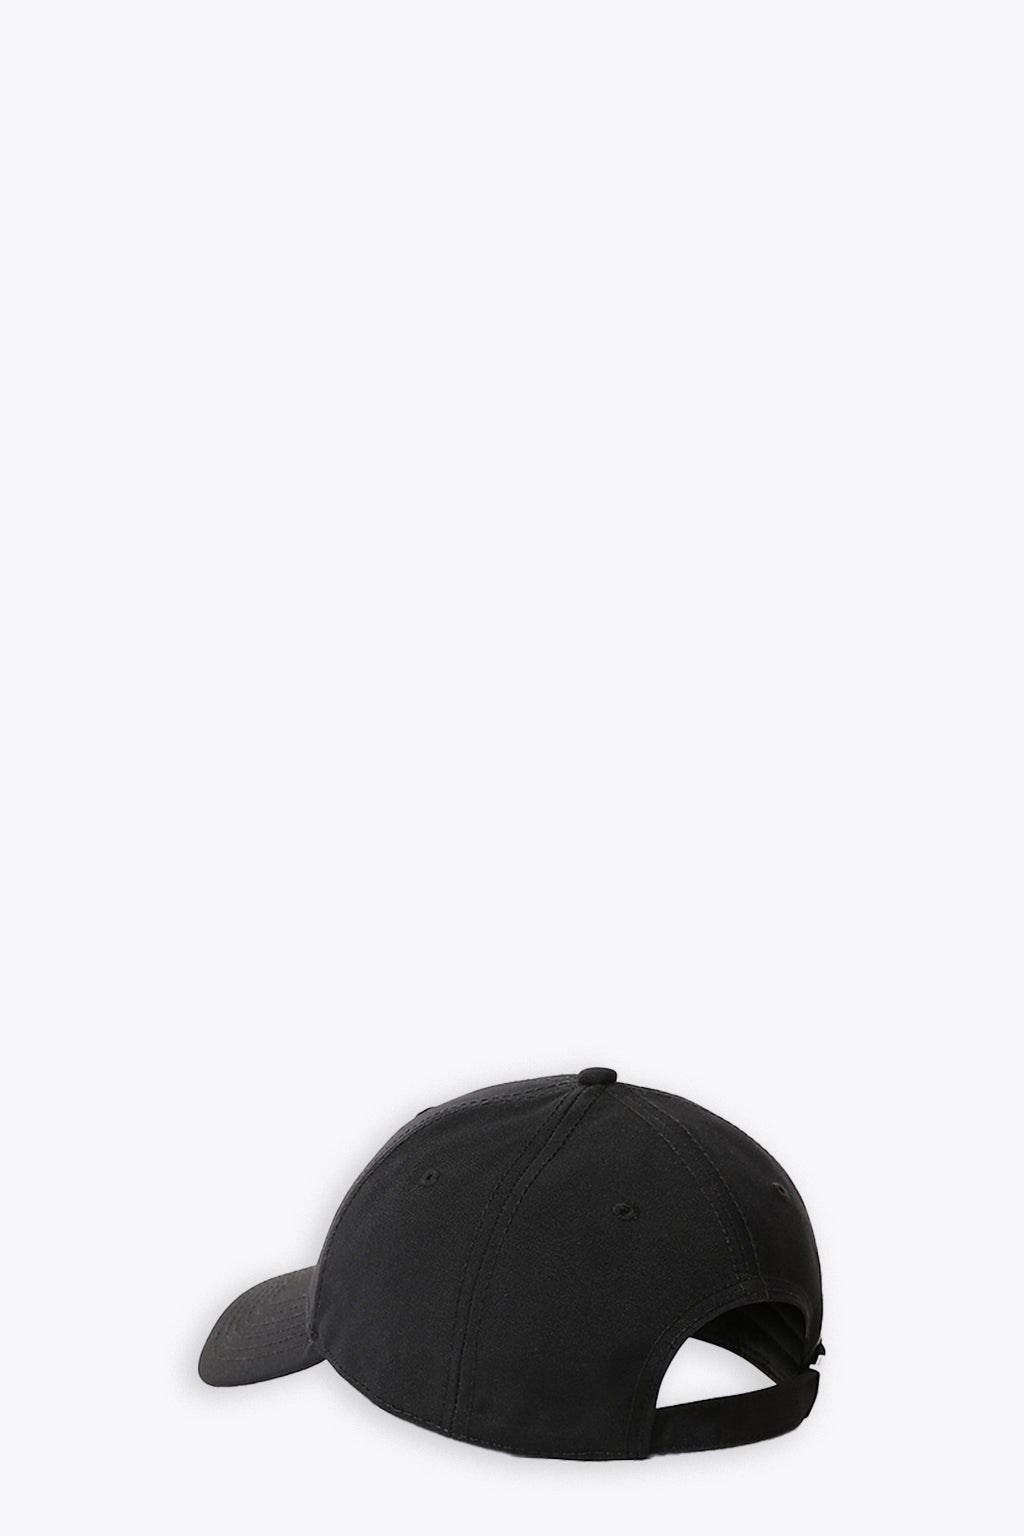 alt-image__Black-cap-with-logo-embroidery---Recycled-66-classic-hat-